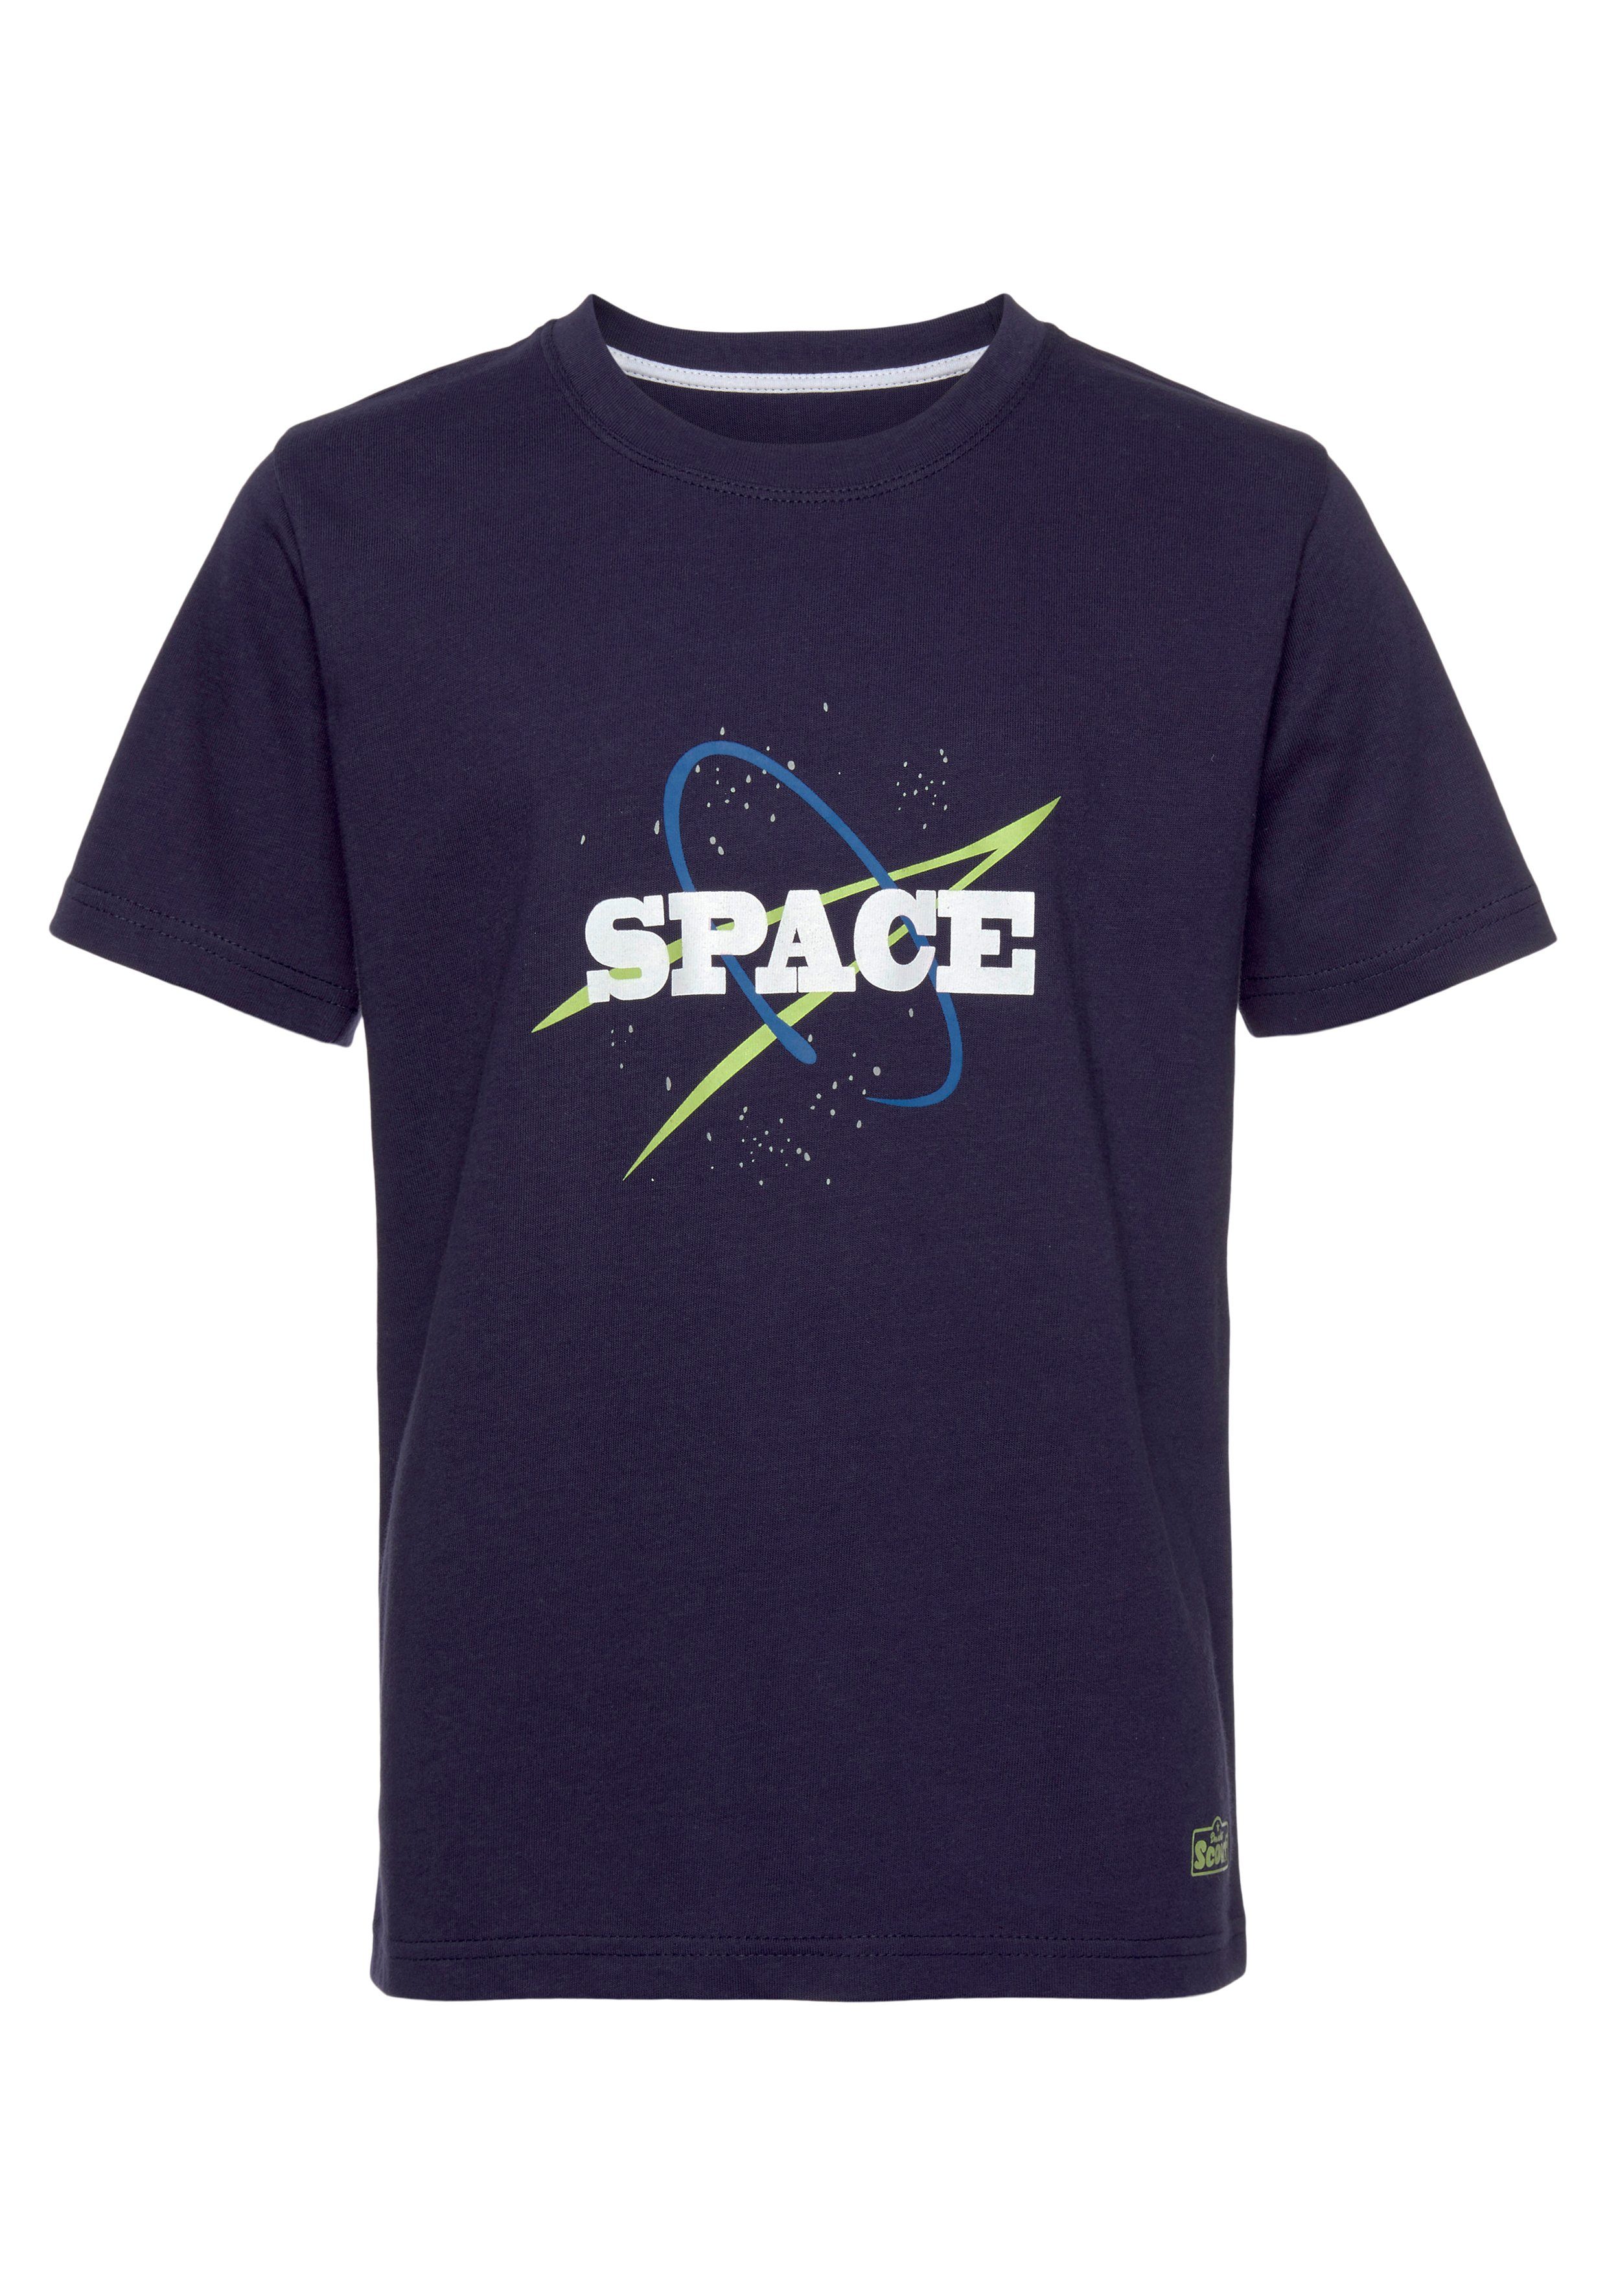 aus SPACE Bio-Baumwolle (Packung, Scout T-Shirt 2er-Pack)